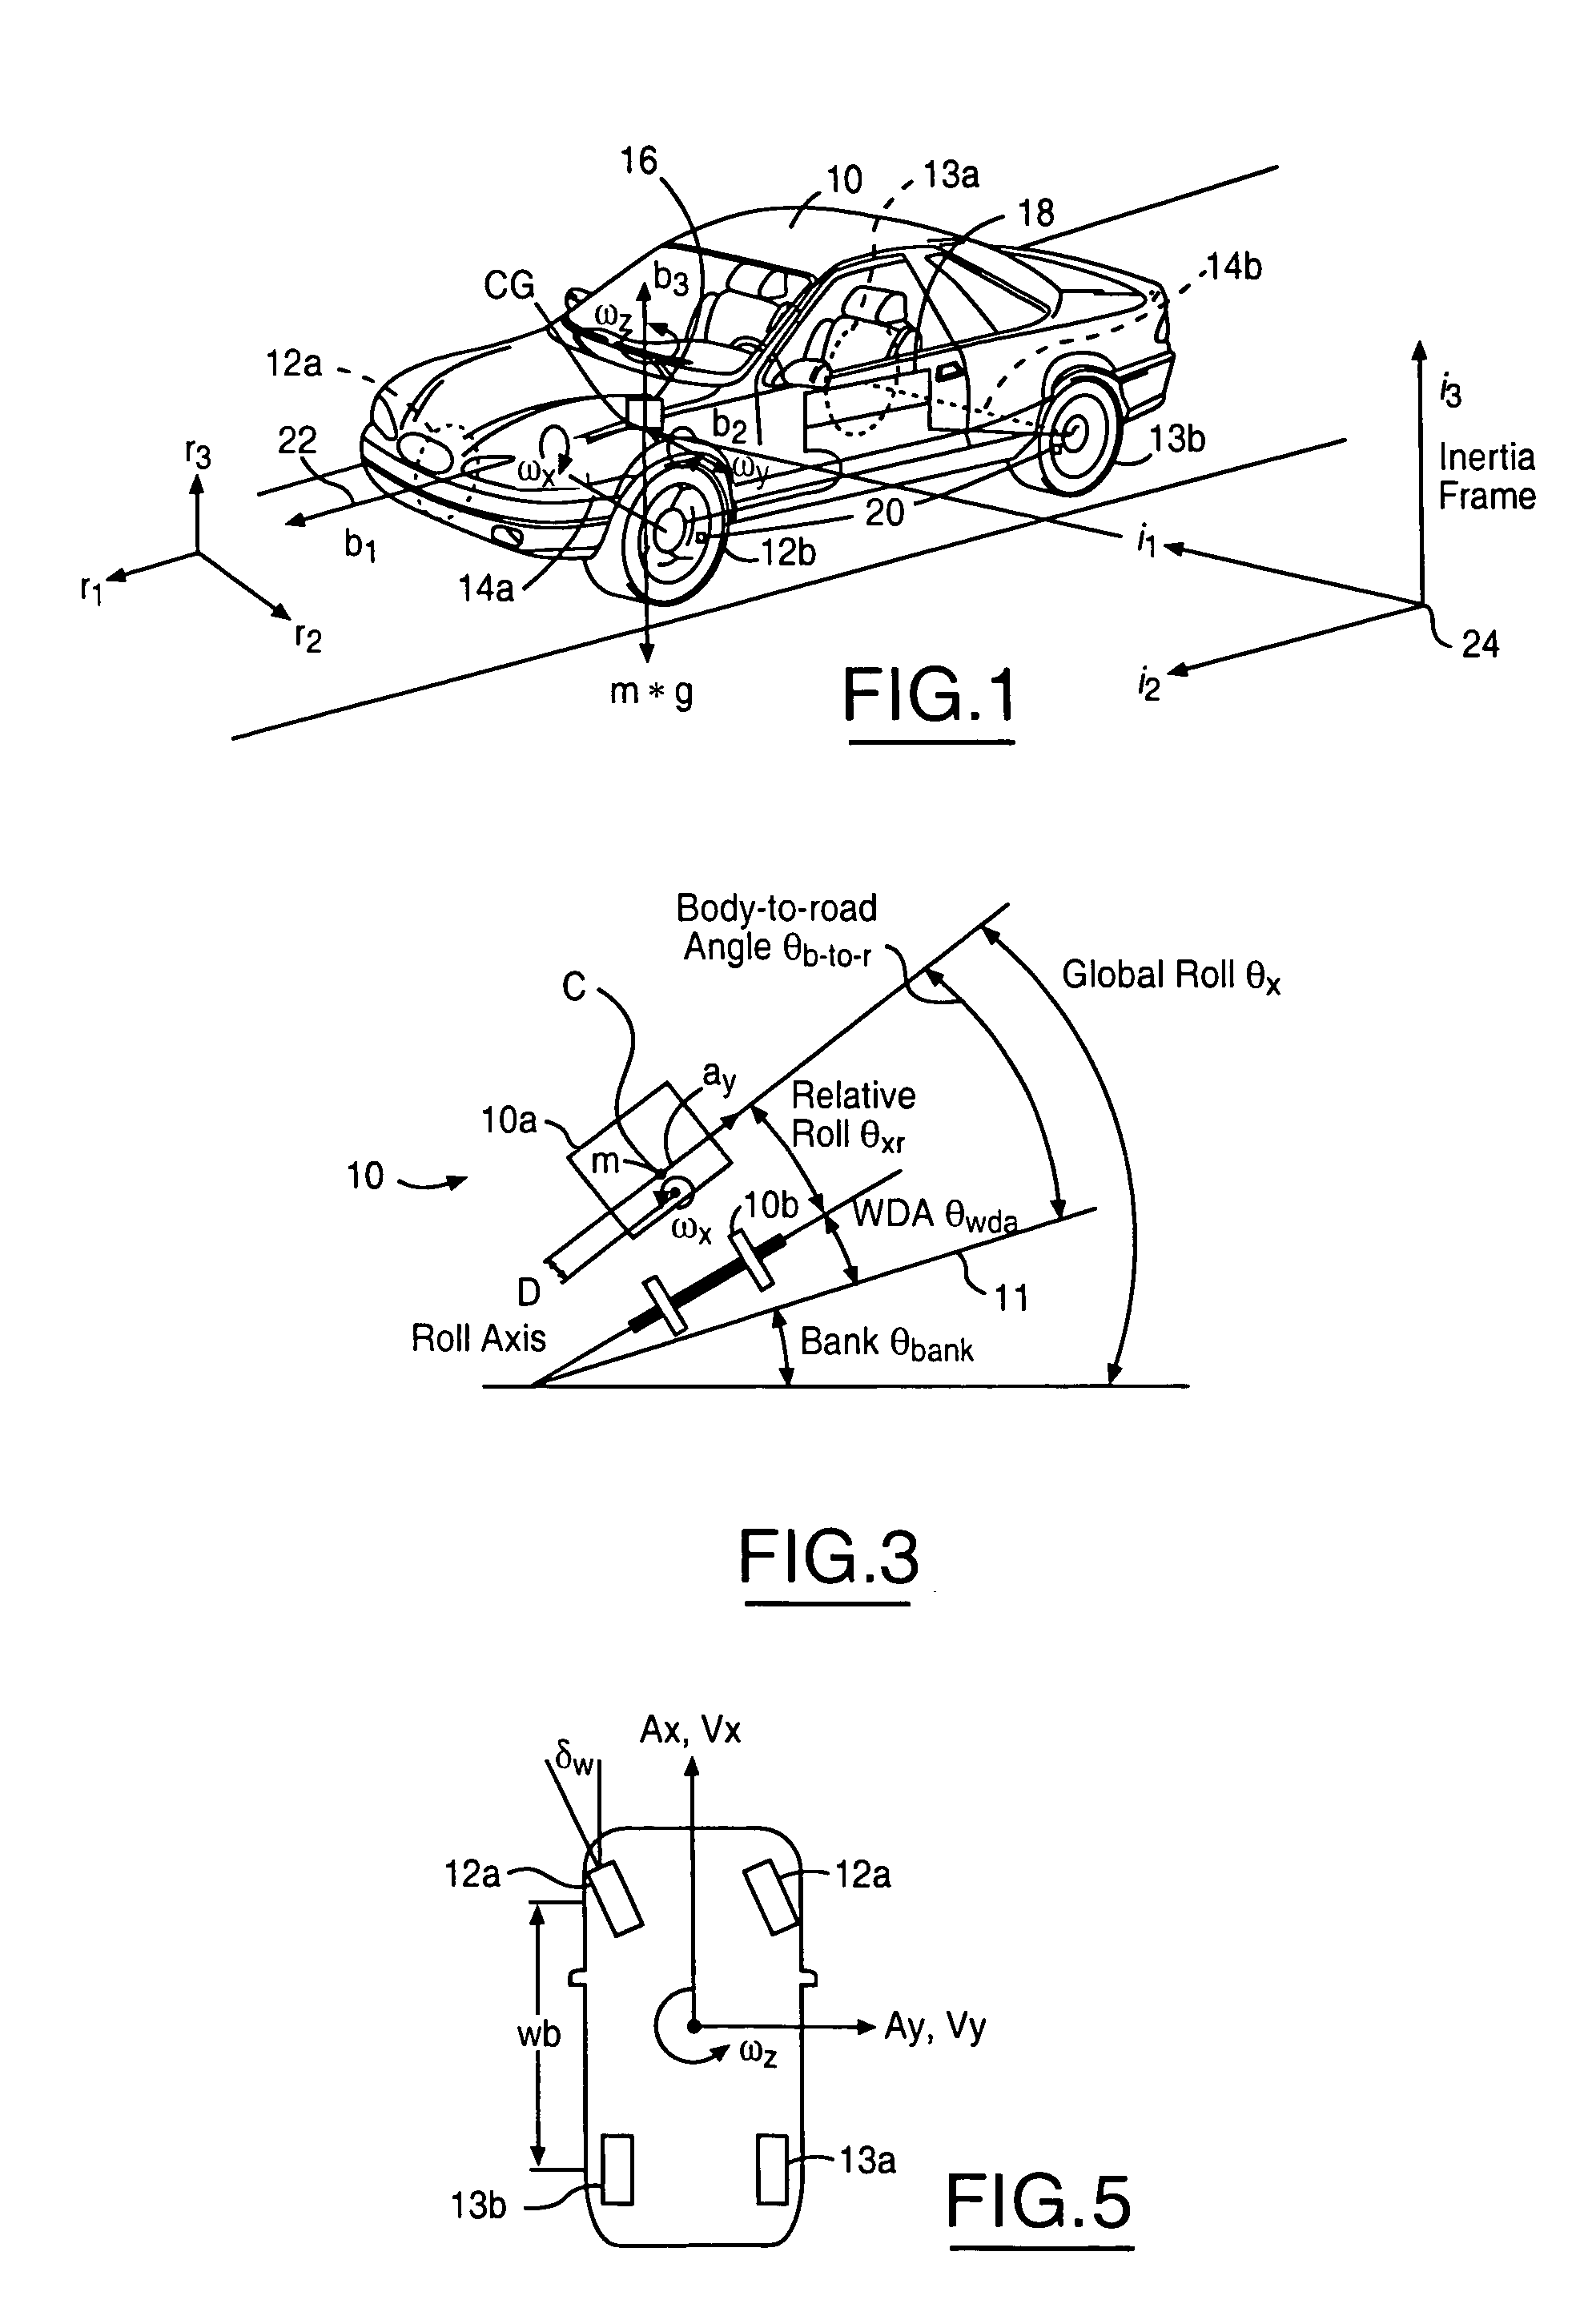 System for dynamically determining vehicle rear/trunk loading for use in a vehicle control system